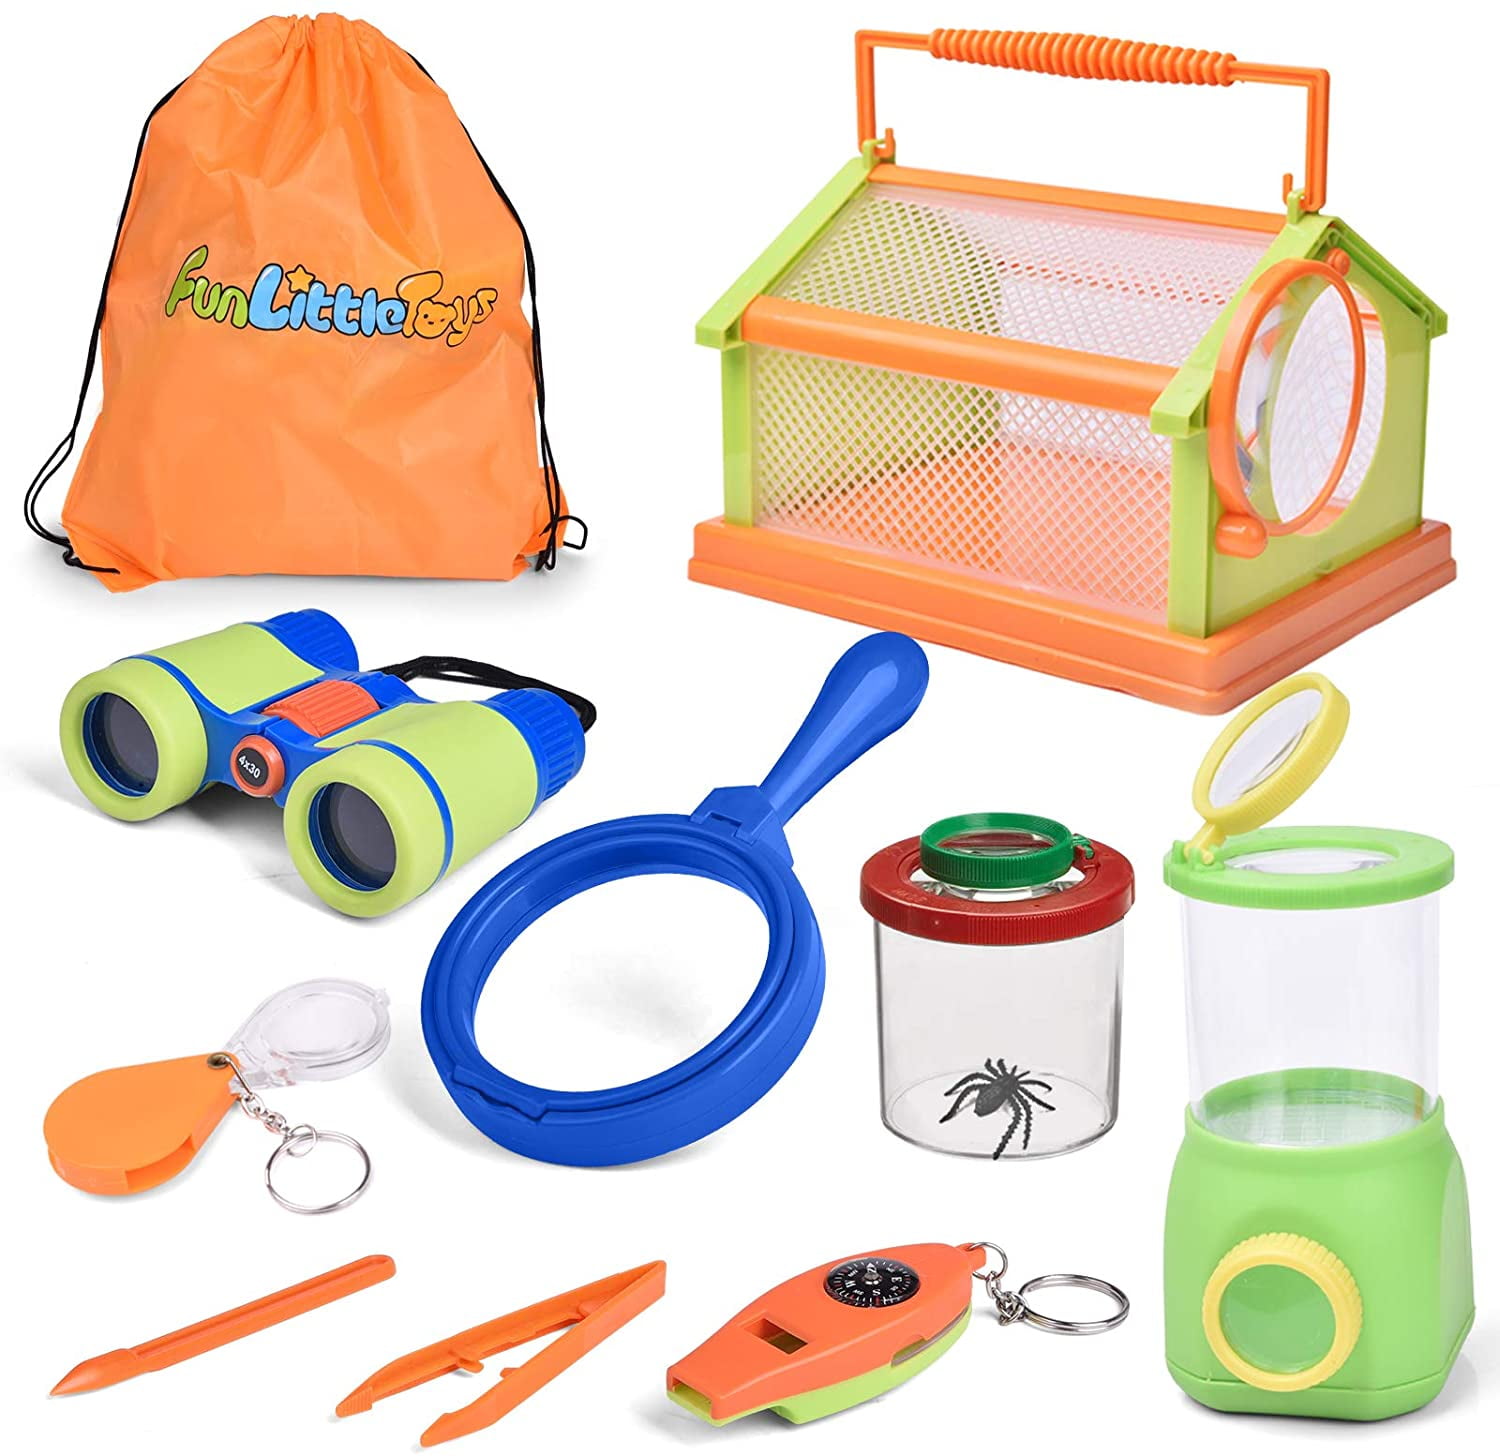 Fun Little Toys Insect Catching Toy Set, Summer Outdoor Toys for